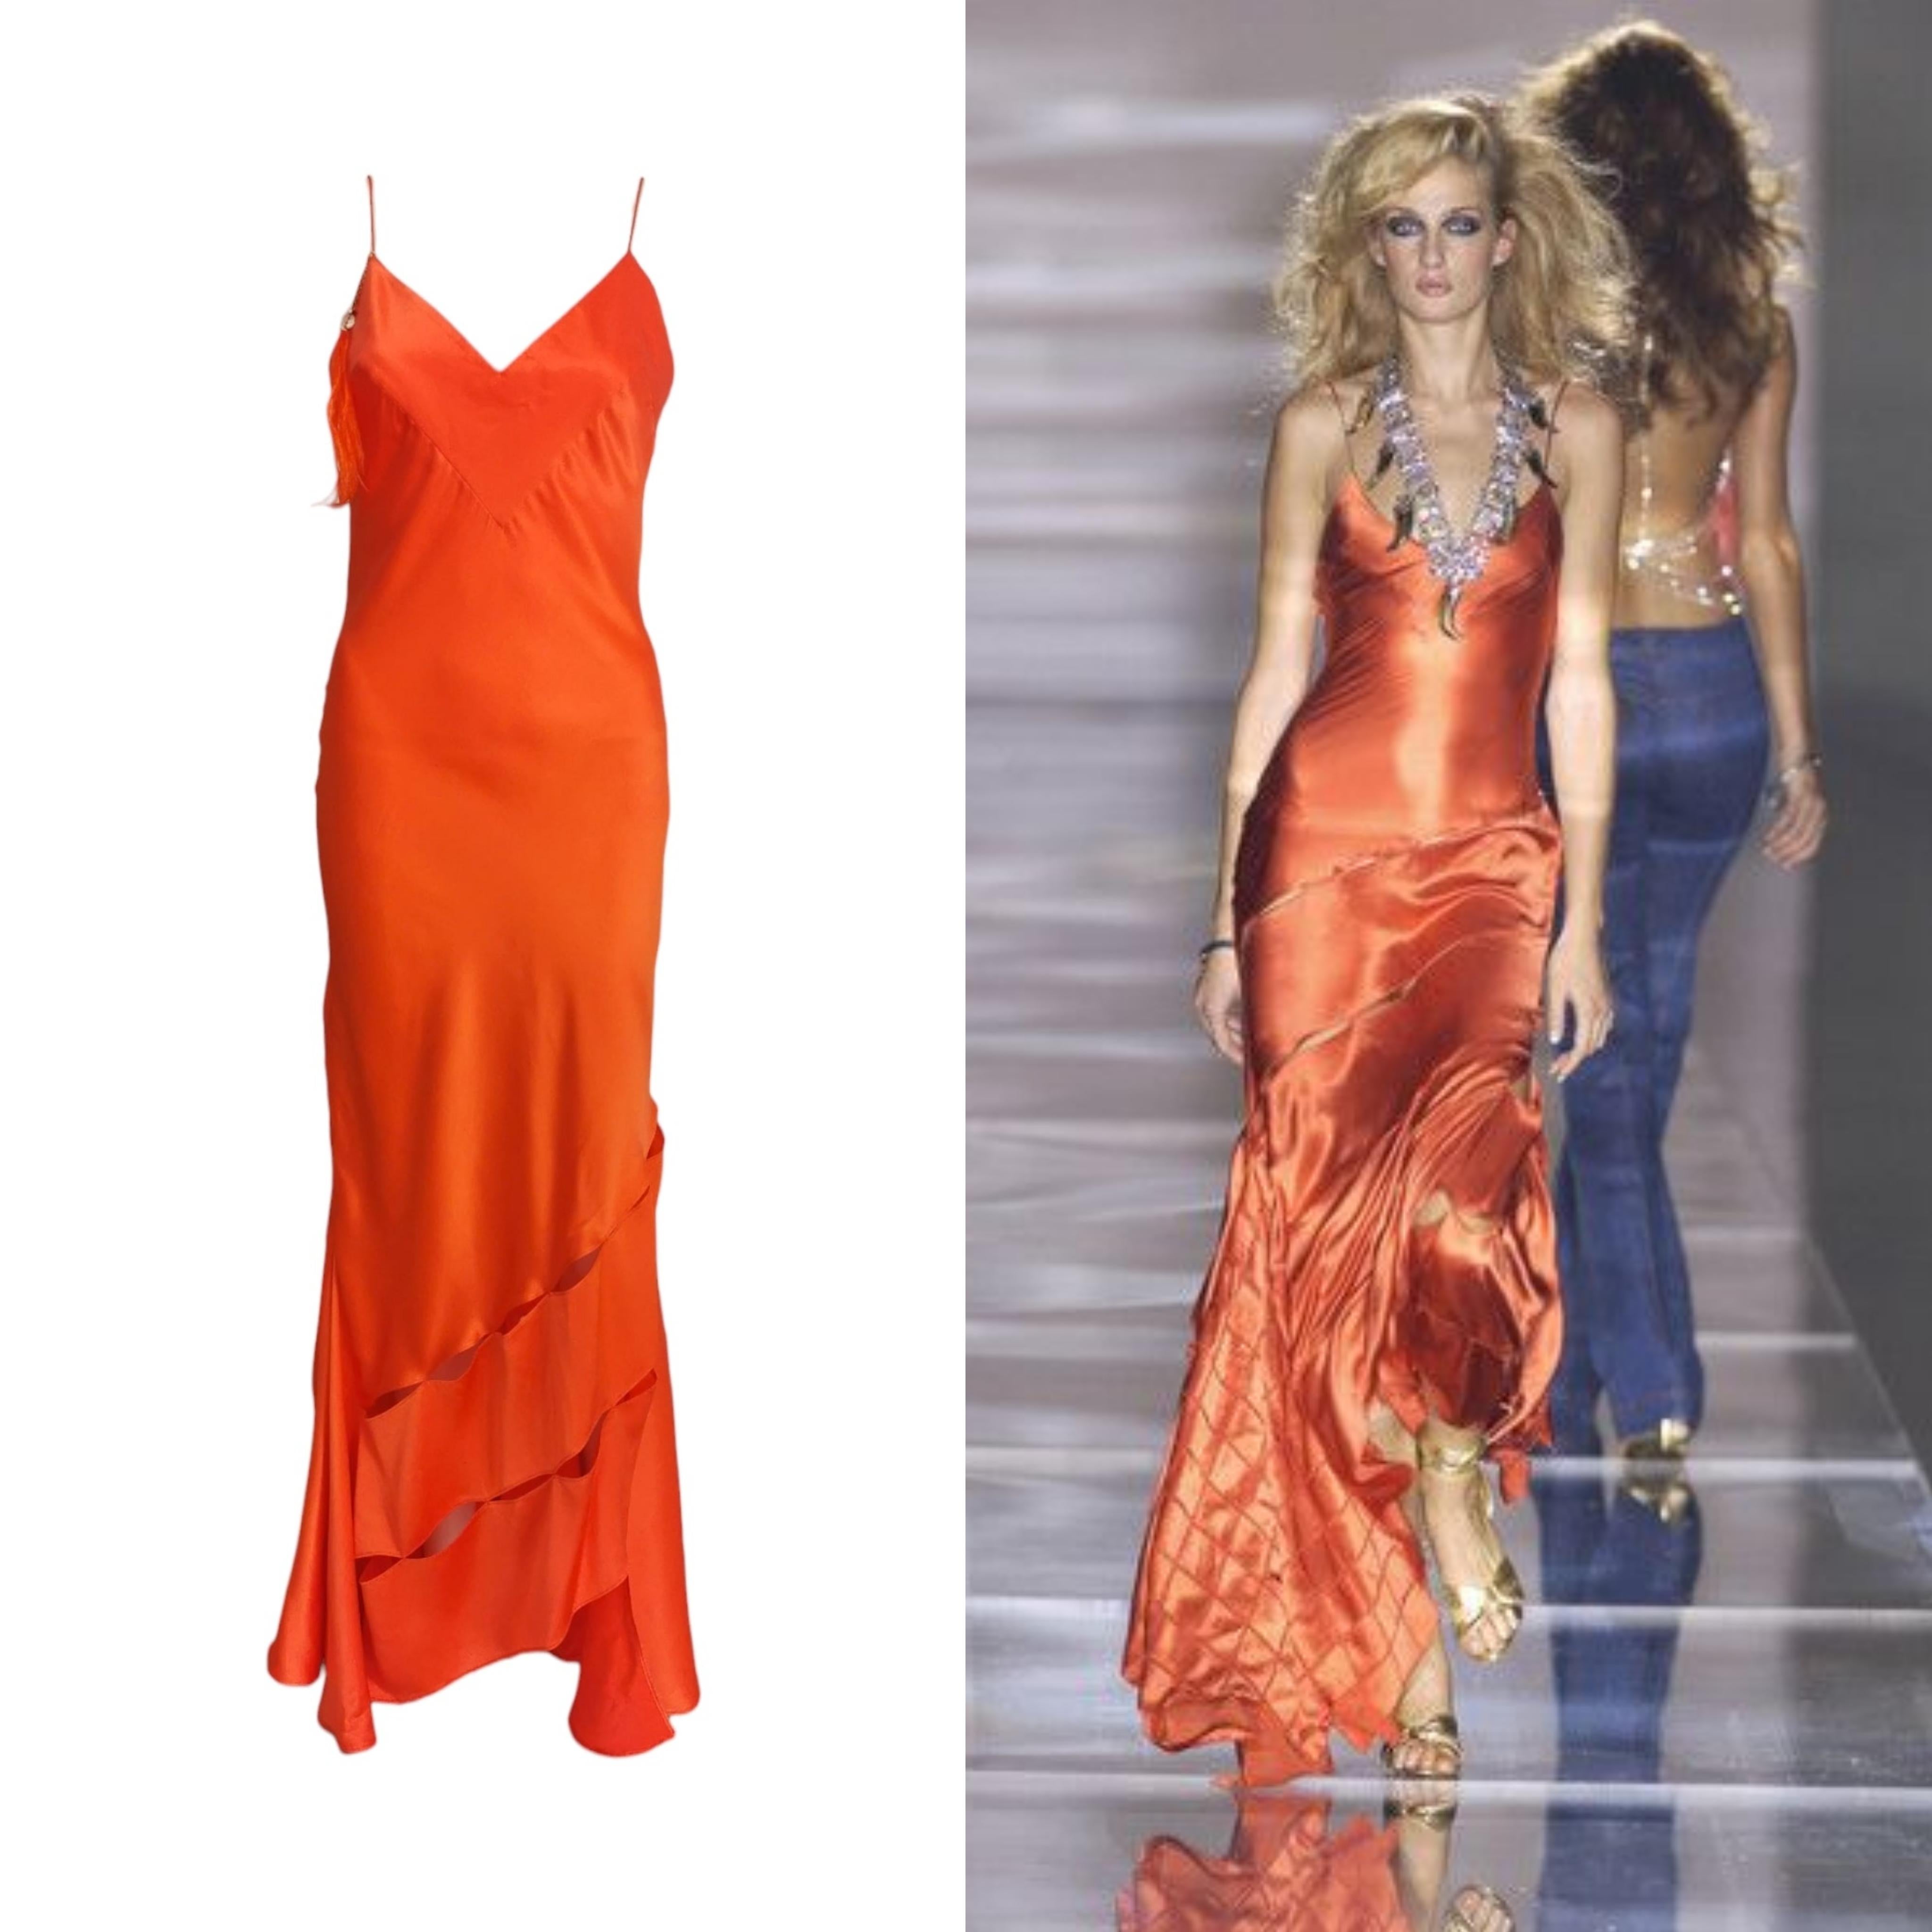 Roberto Cavalli bias cut gown from the SS 2004 collection. Features a feather charm.
Size: Medium 
Condition: Very Good
Material: Silk